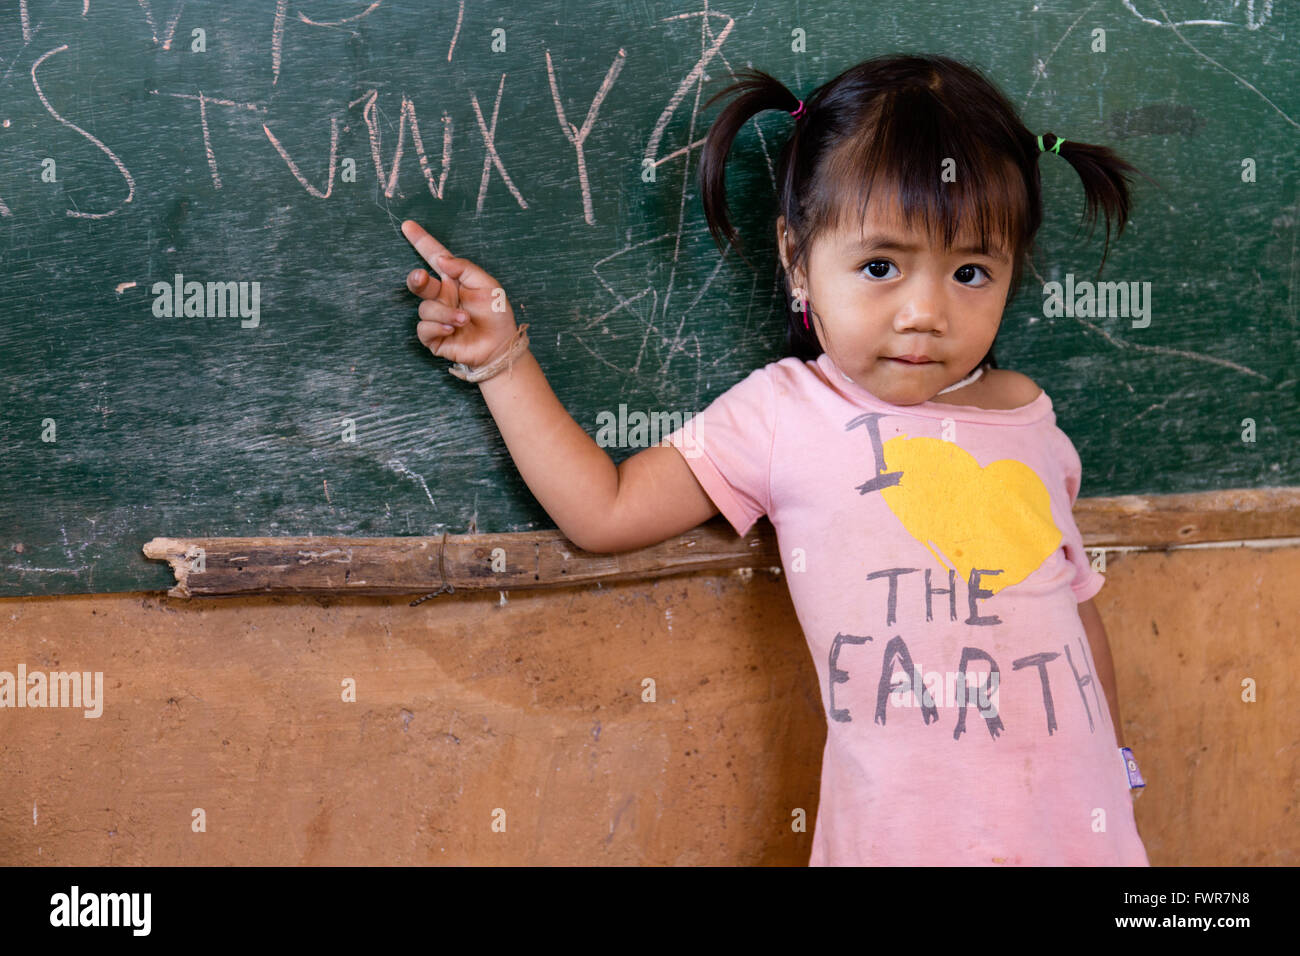 Little girl student pointing to a blackboard, Akha hilltribe, Chiang Rai Province, Northern Thailand, Thailand Stock Photo